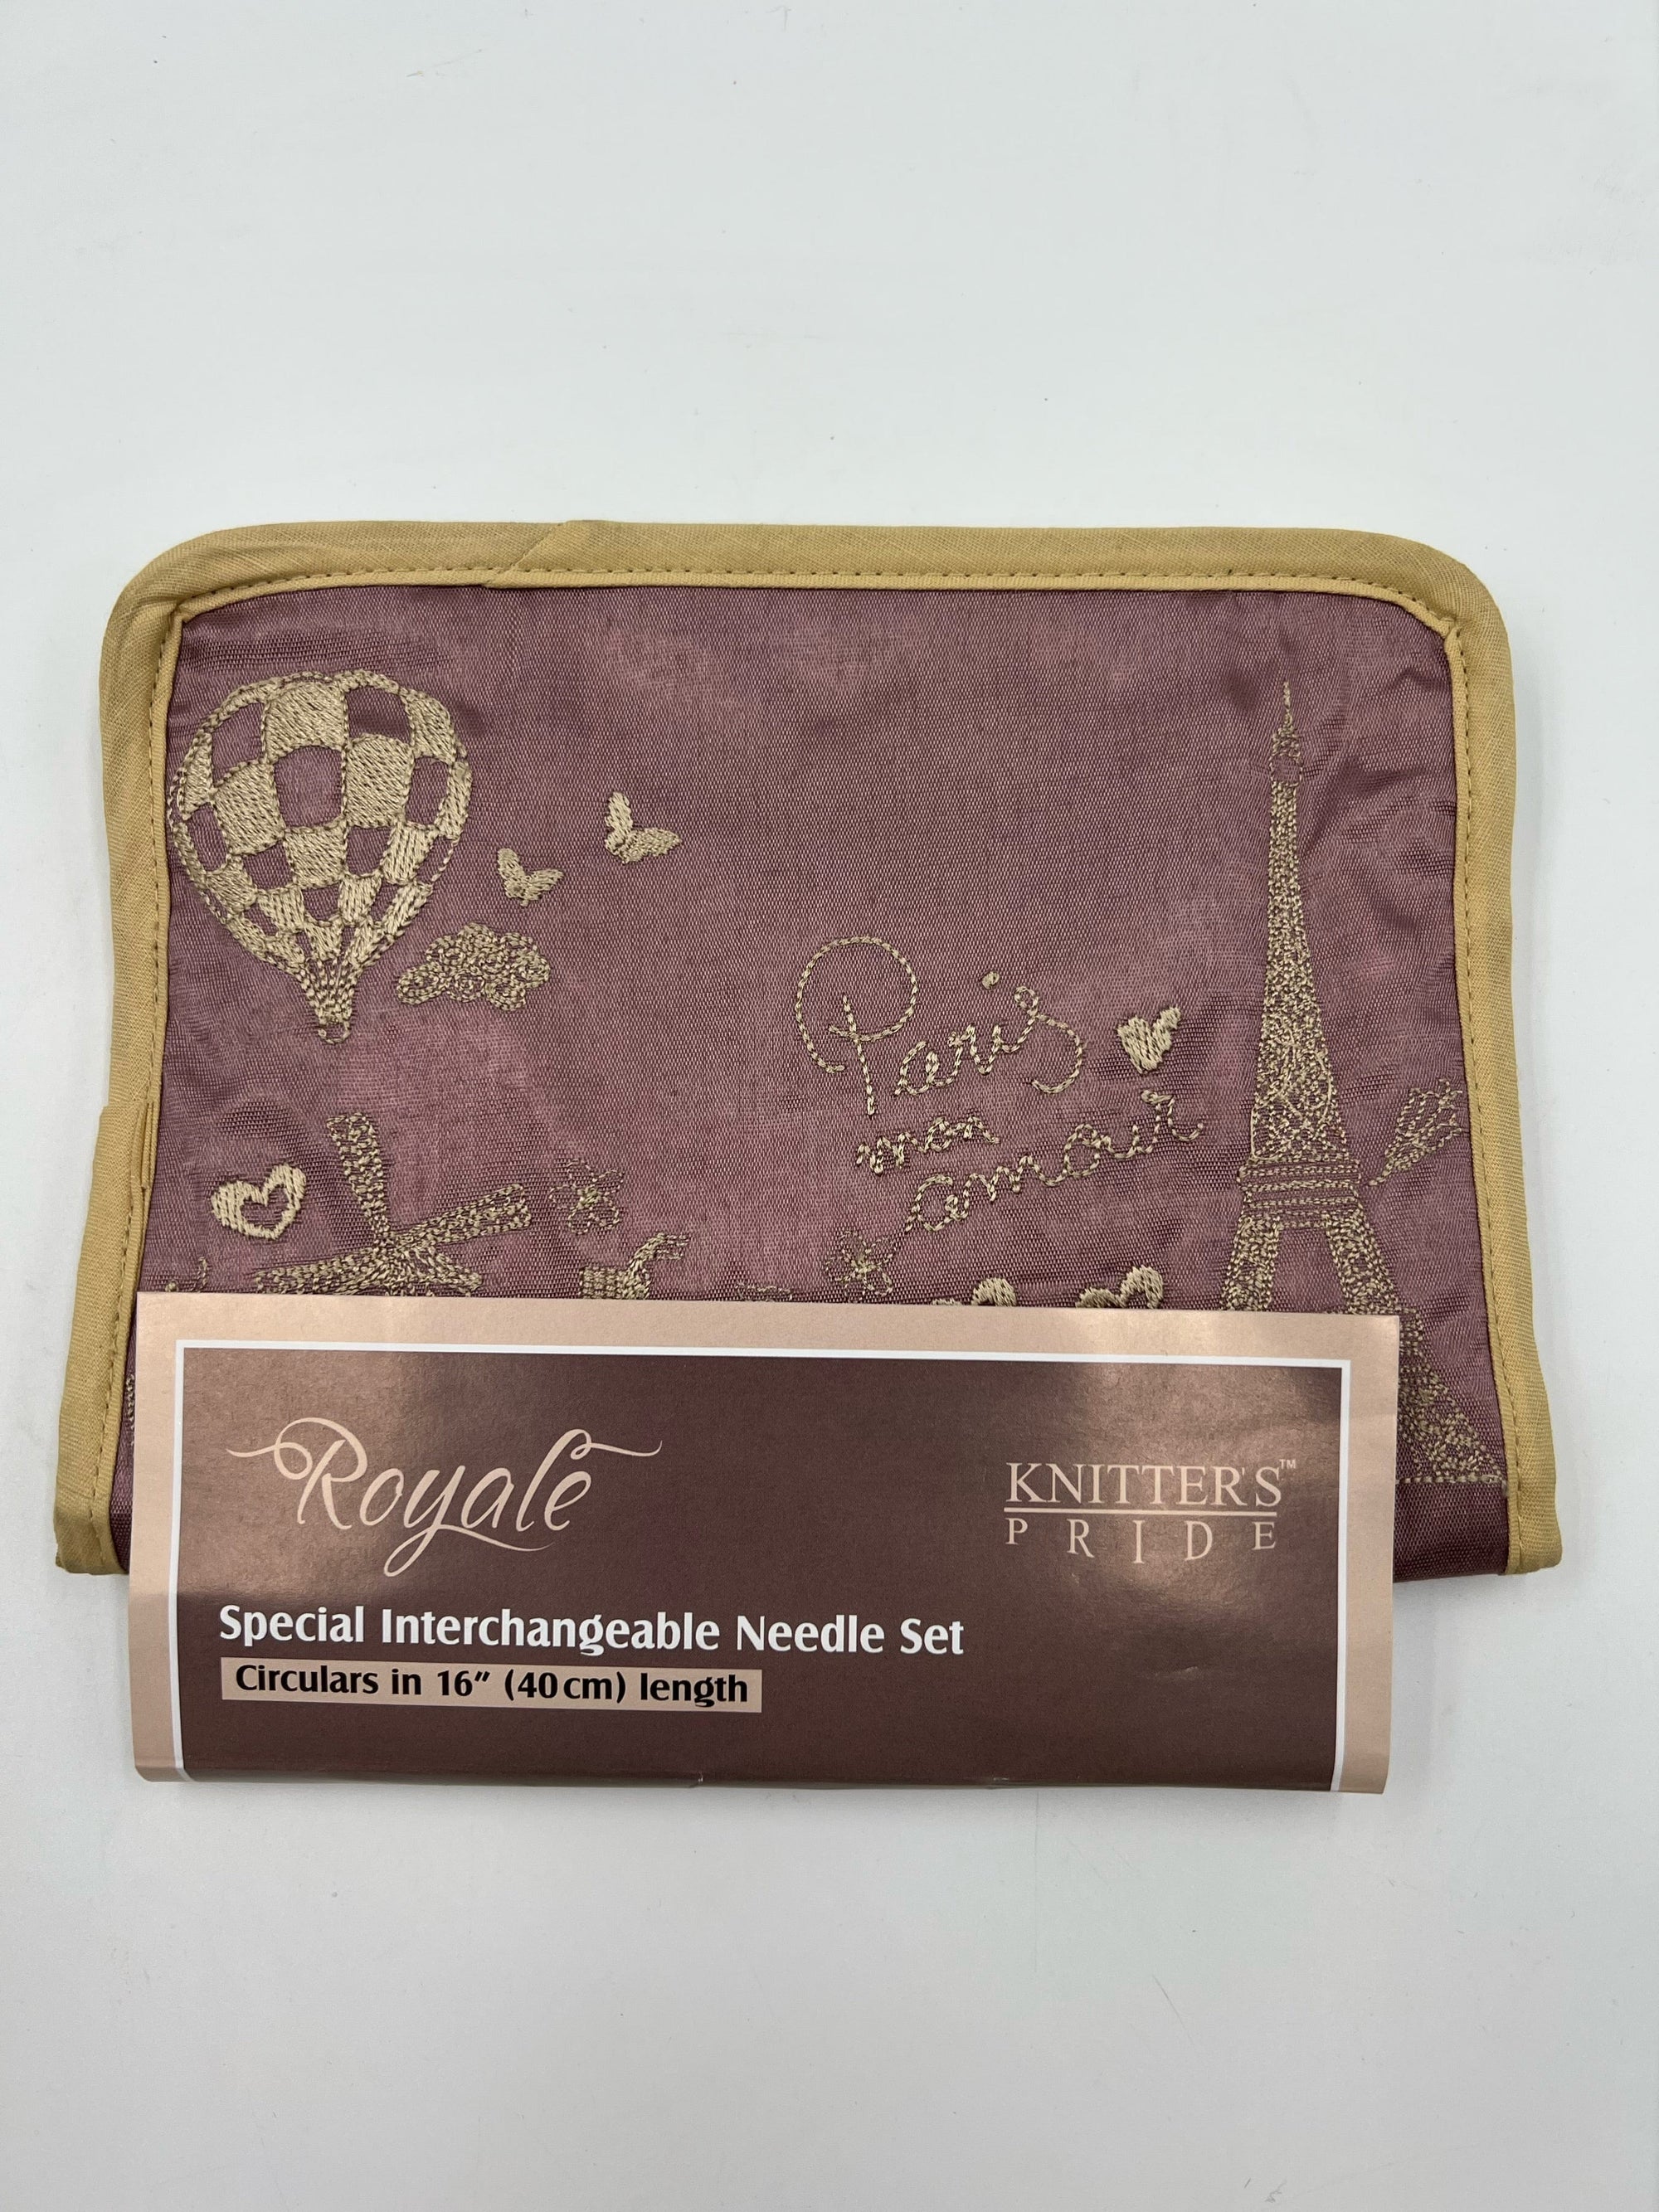 Knitter's Pride Knitting Needles Royale Special (Shorties) Interchangeable Set